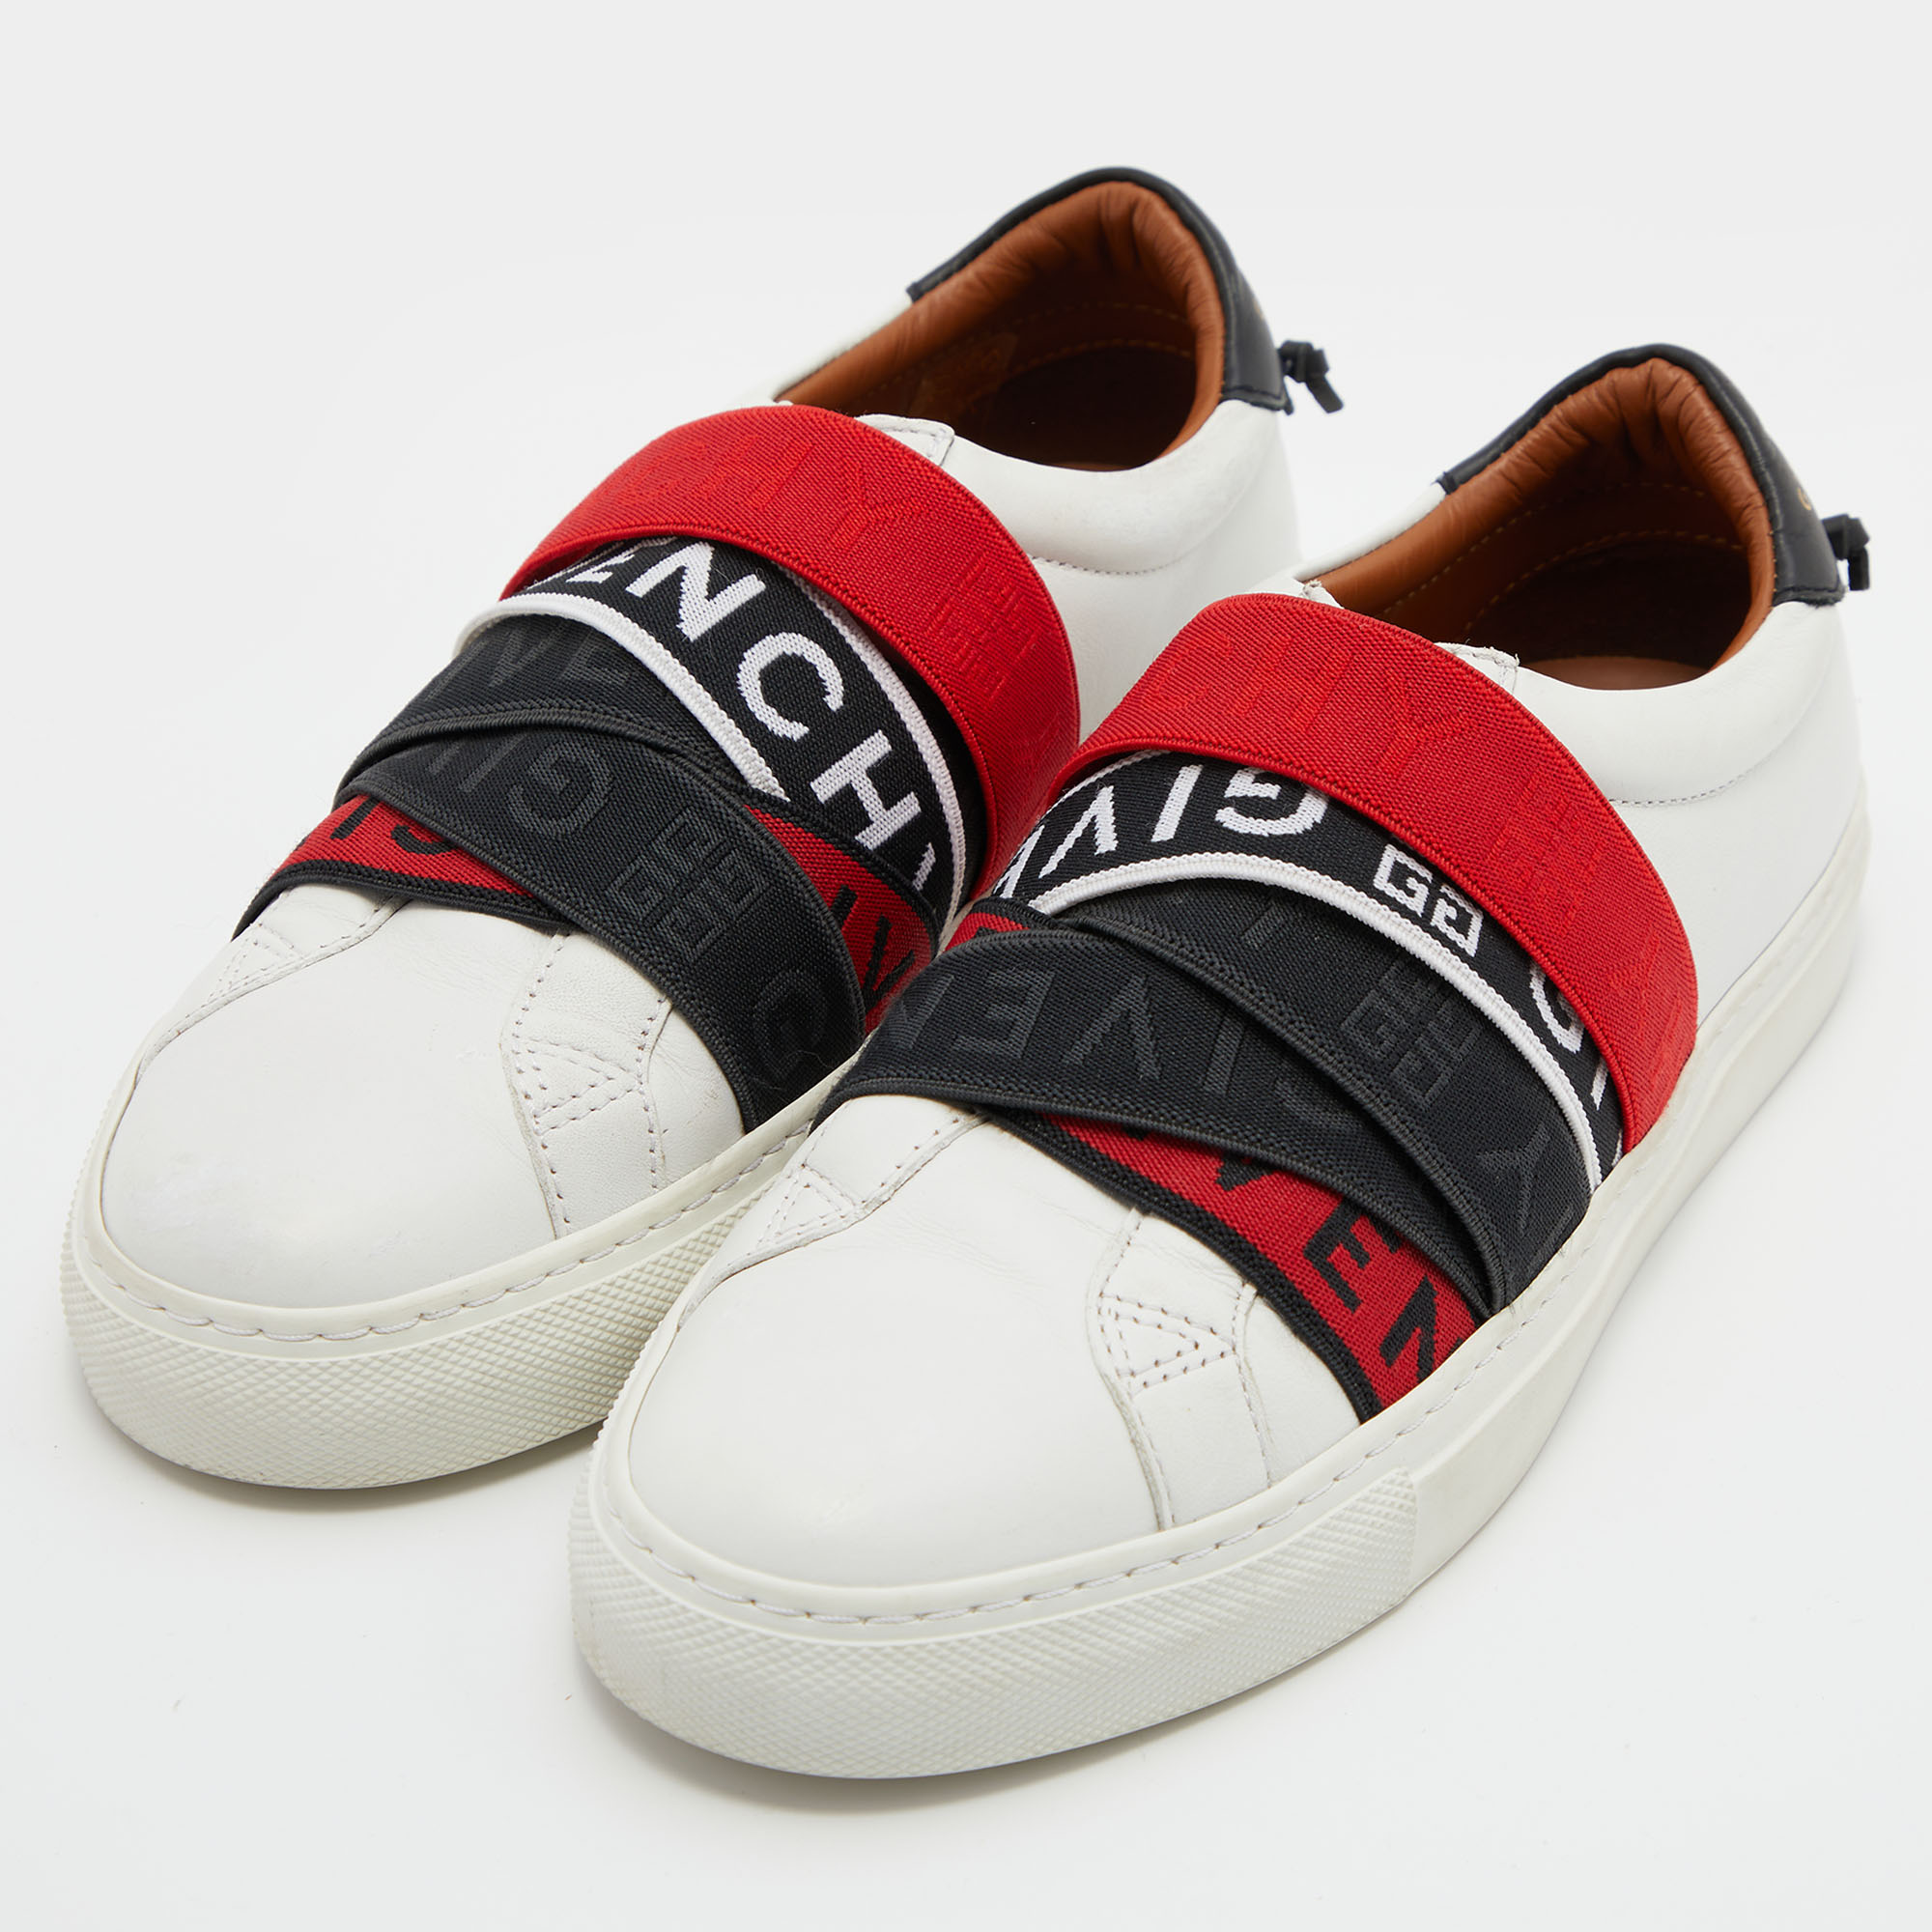 

Givenchy White/Red Leather And Logo Stretch Band Urban Street Slip On Sneakers Size